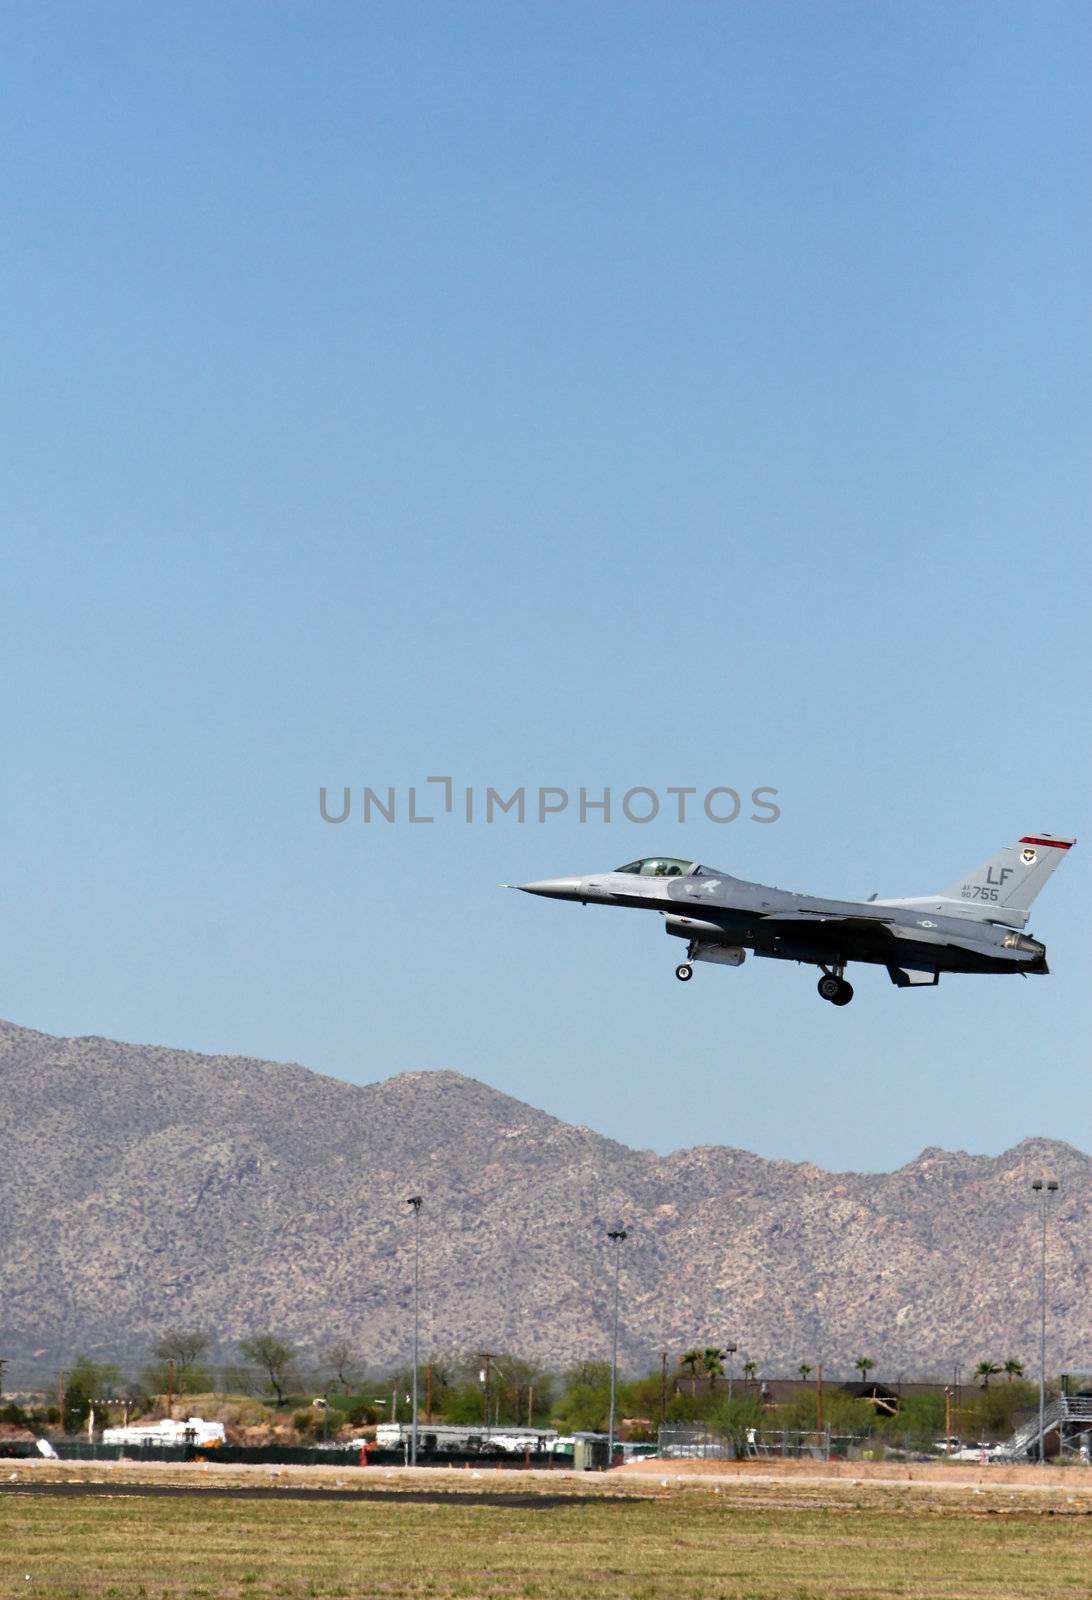 An airforce jet prepares to land on a desert runway